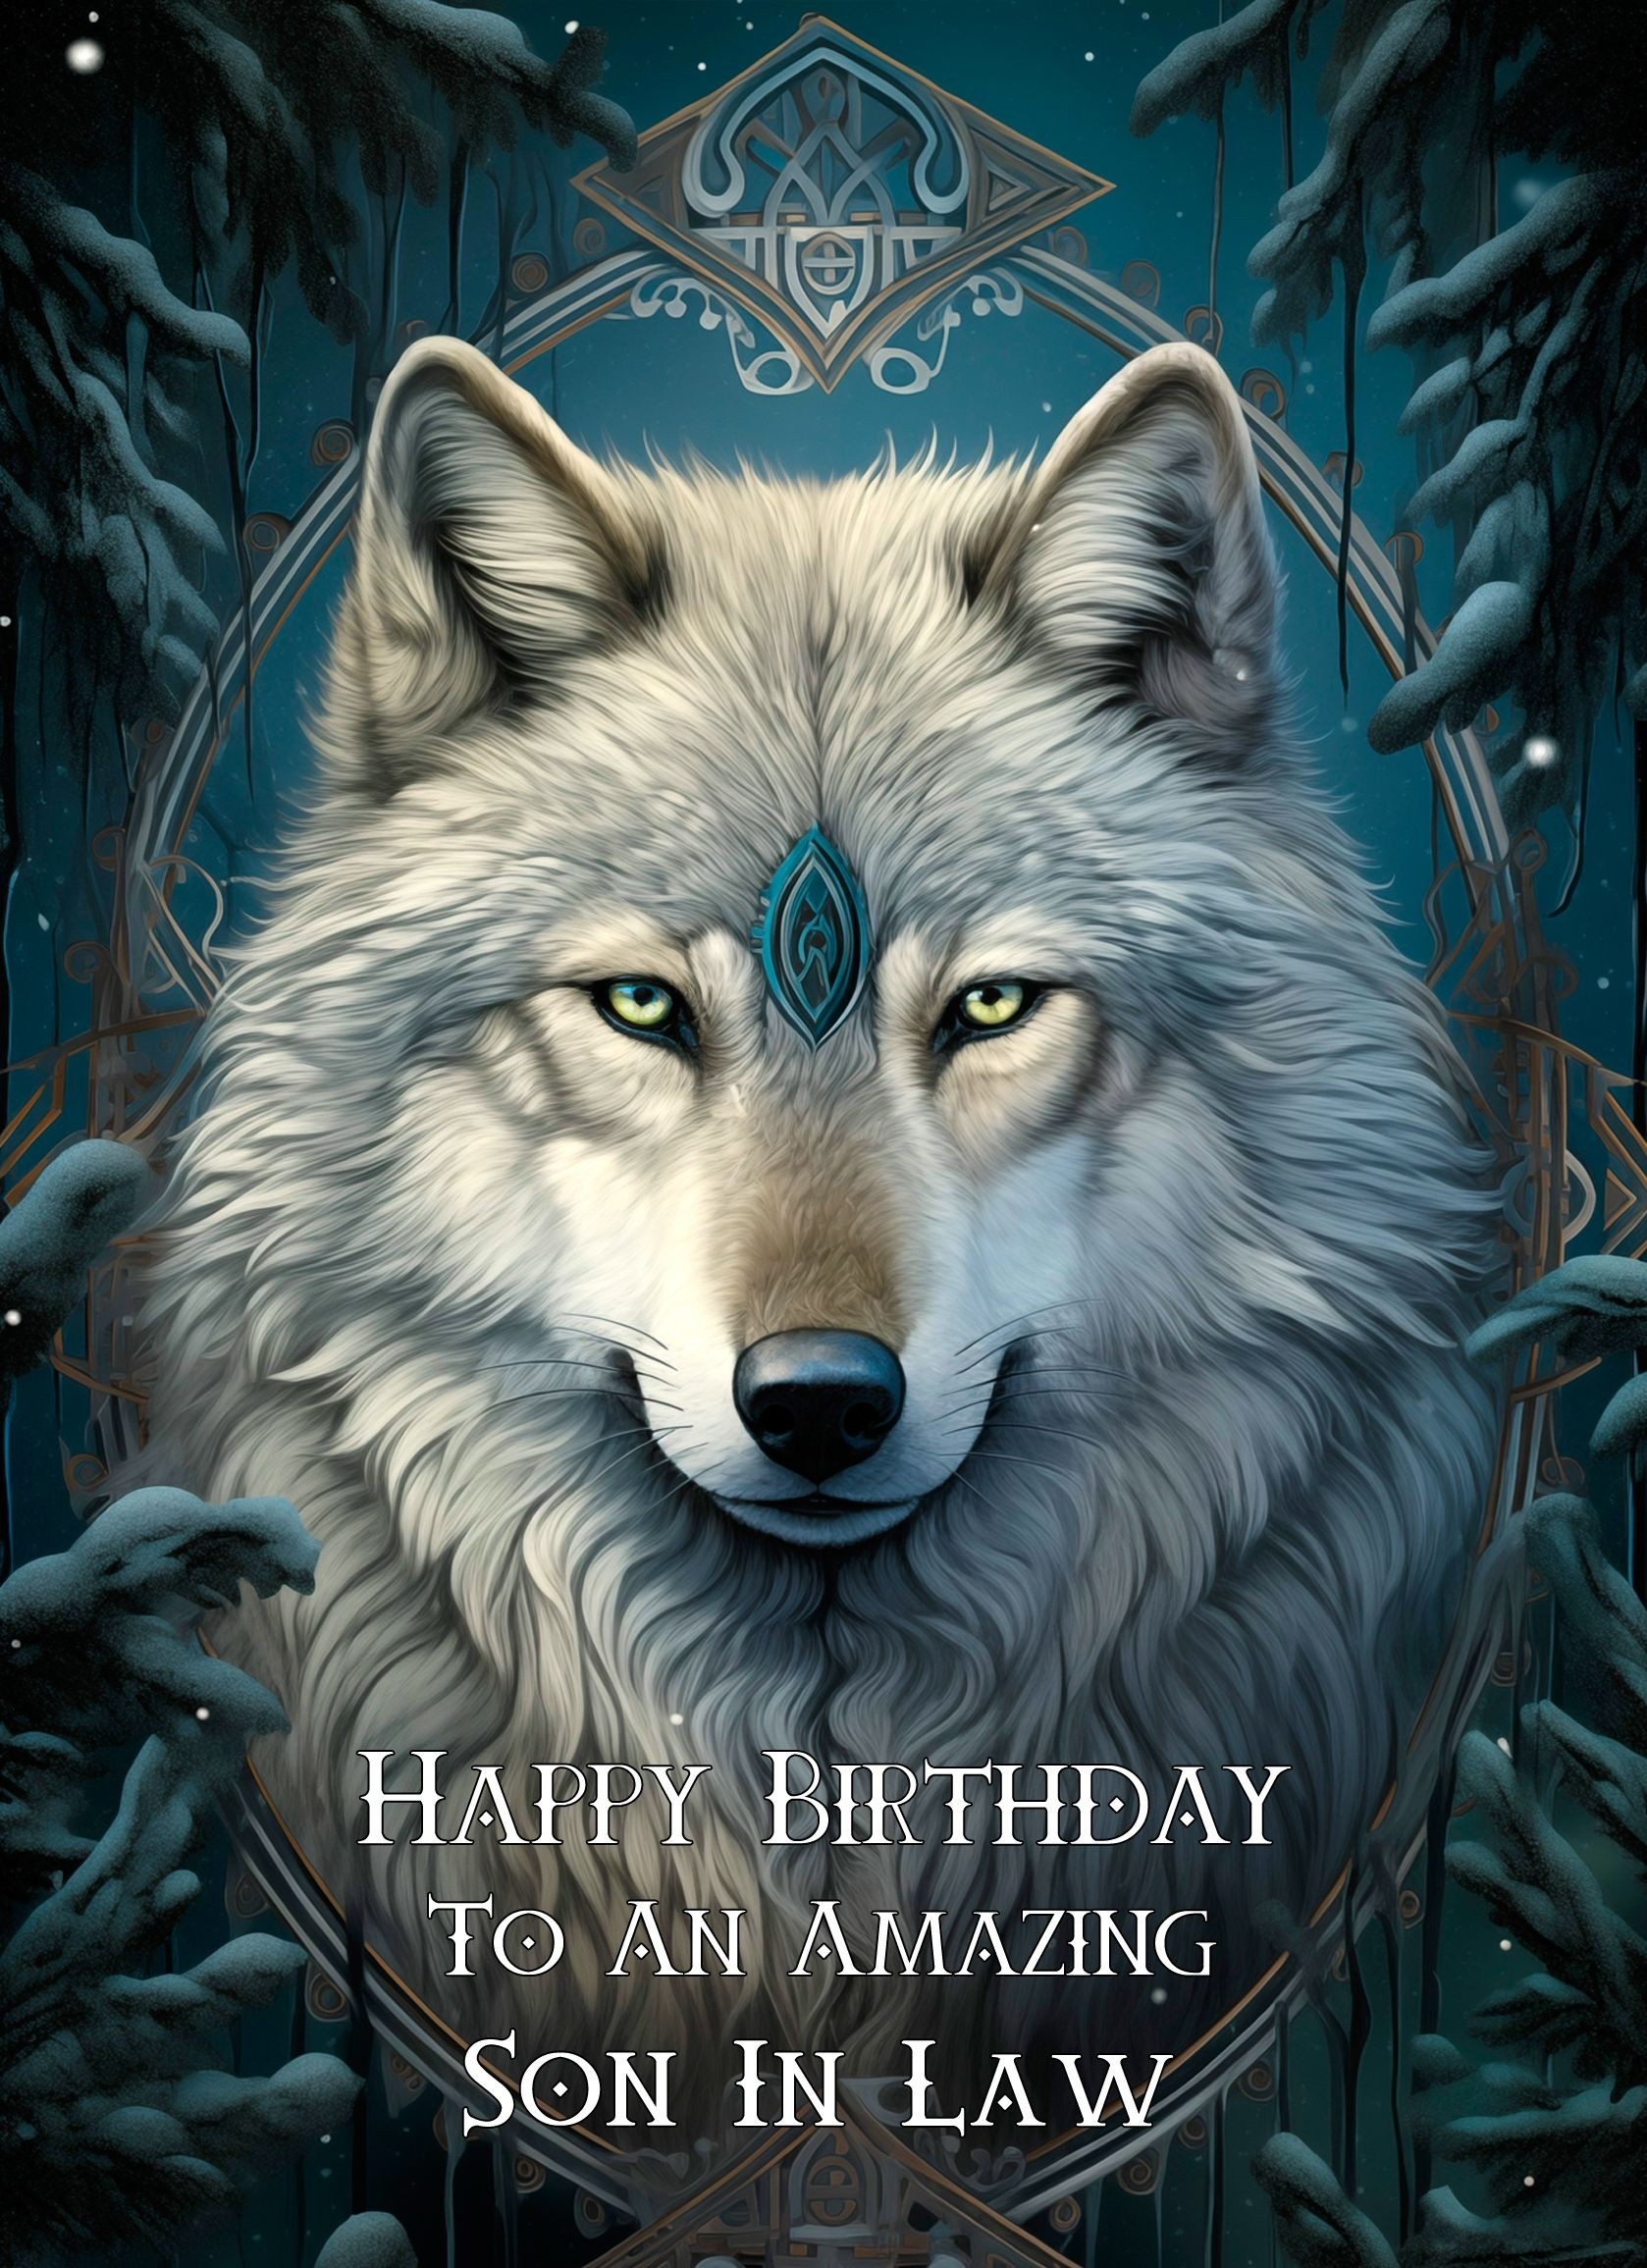 Tribal Wolf Art Birthday Card For Son in Law (Design 4)